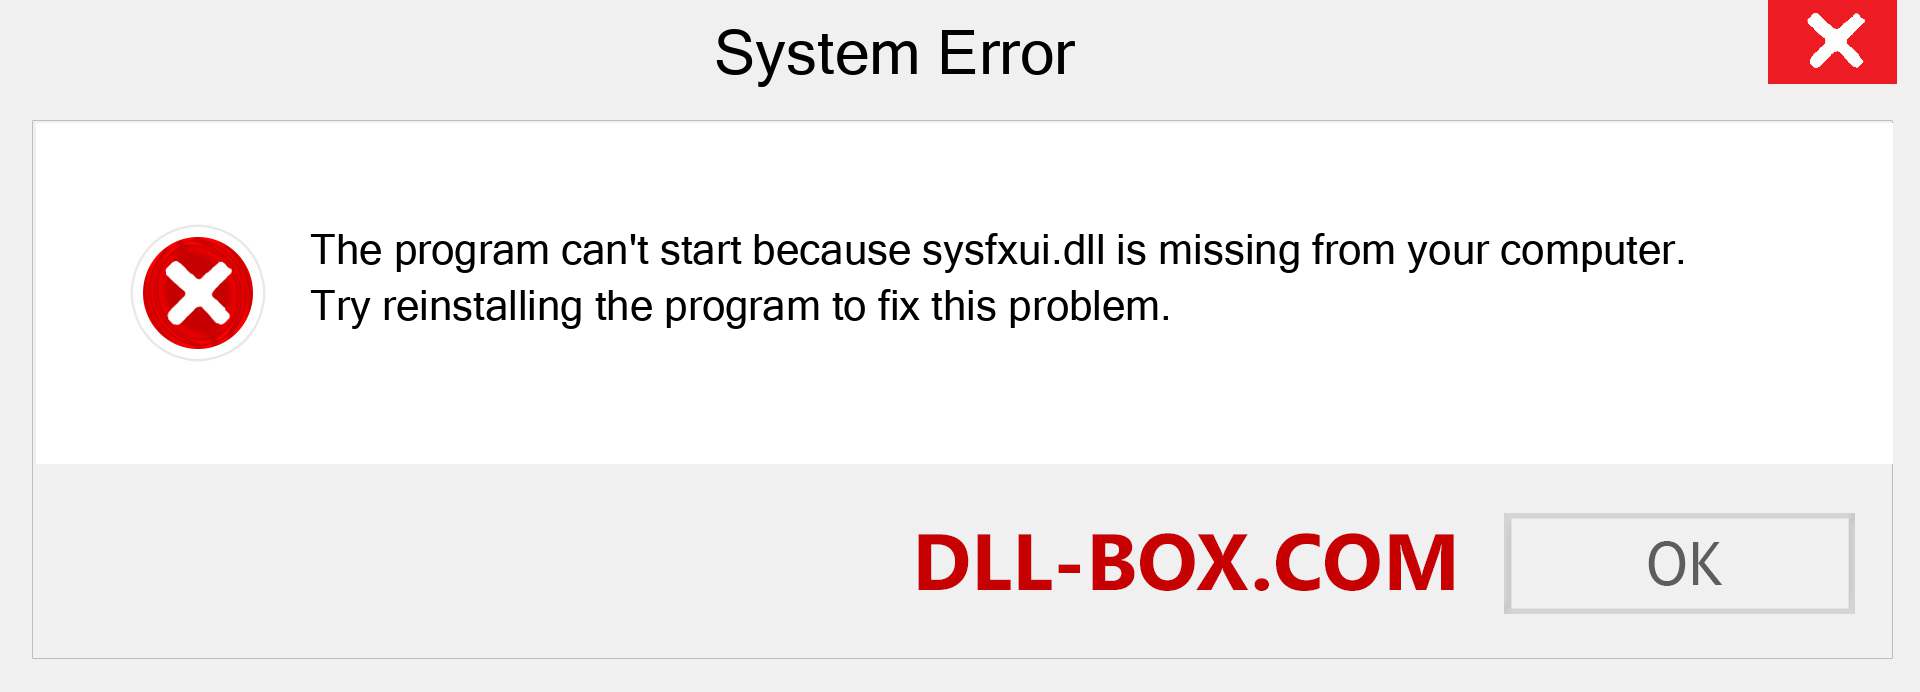  sysfxui.dll file is missing?. Download for Windows 7, 8, 10 - Fix  sysfxui dll Missing Error on Windows, photos, images